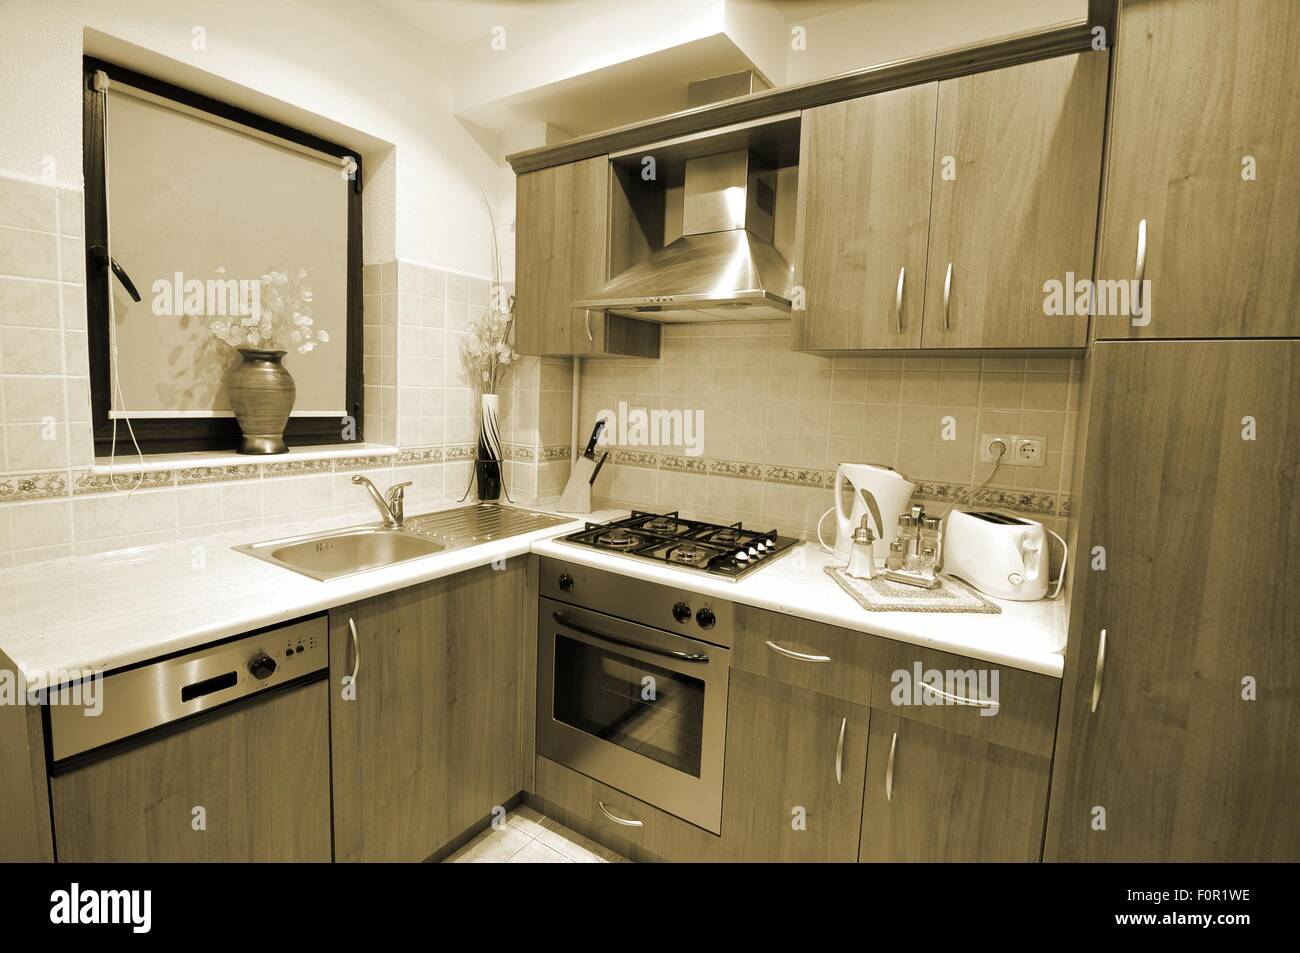 https://c8.alamy.com/comp/F0R1WE/wide-angle-view-of-modern-kitchen-F0R1WE.jpg